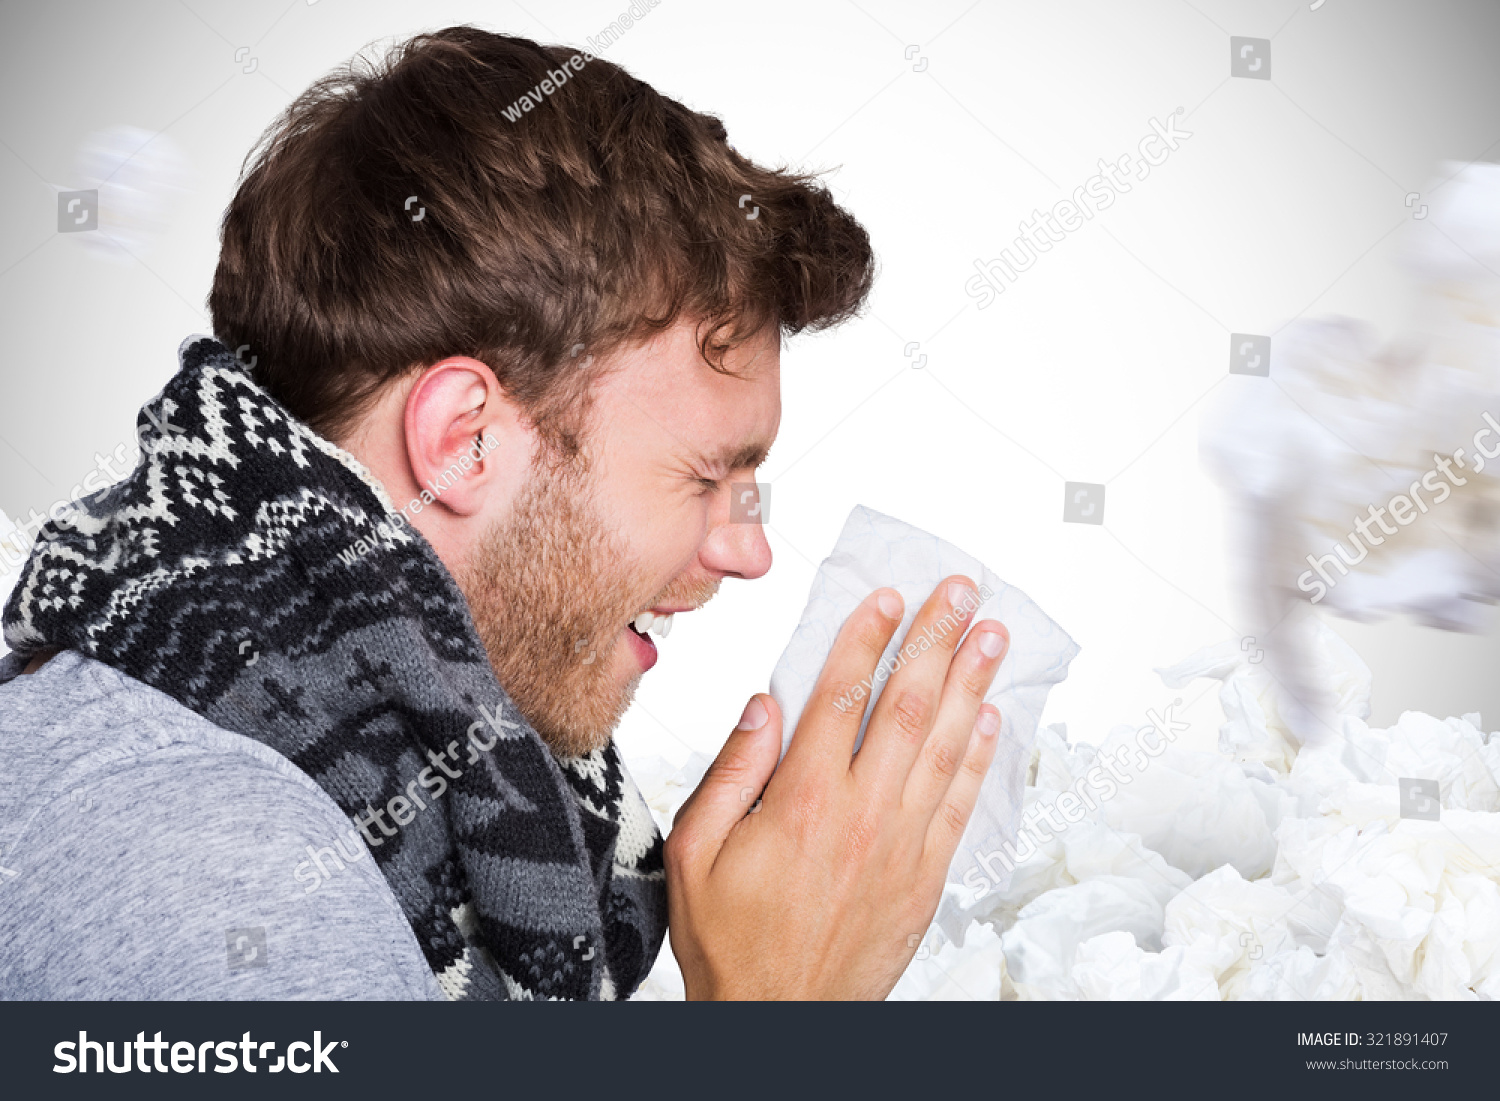 Close up side view of man blowing nose against white background with vignette #321891407